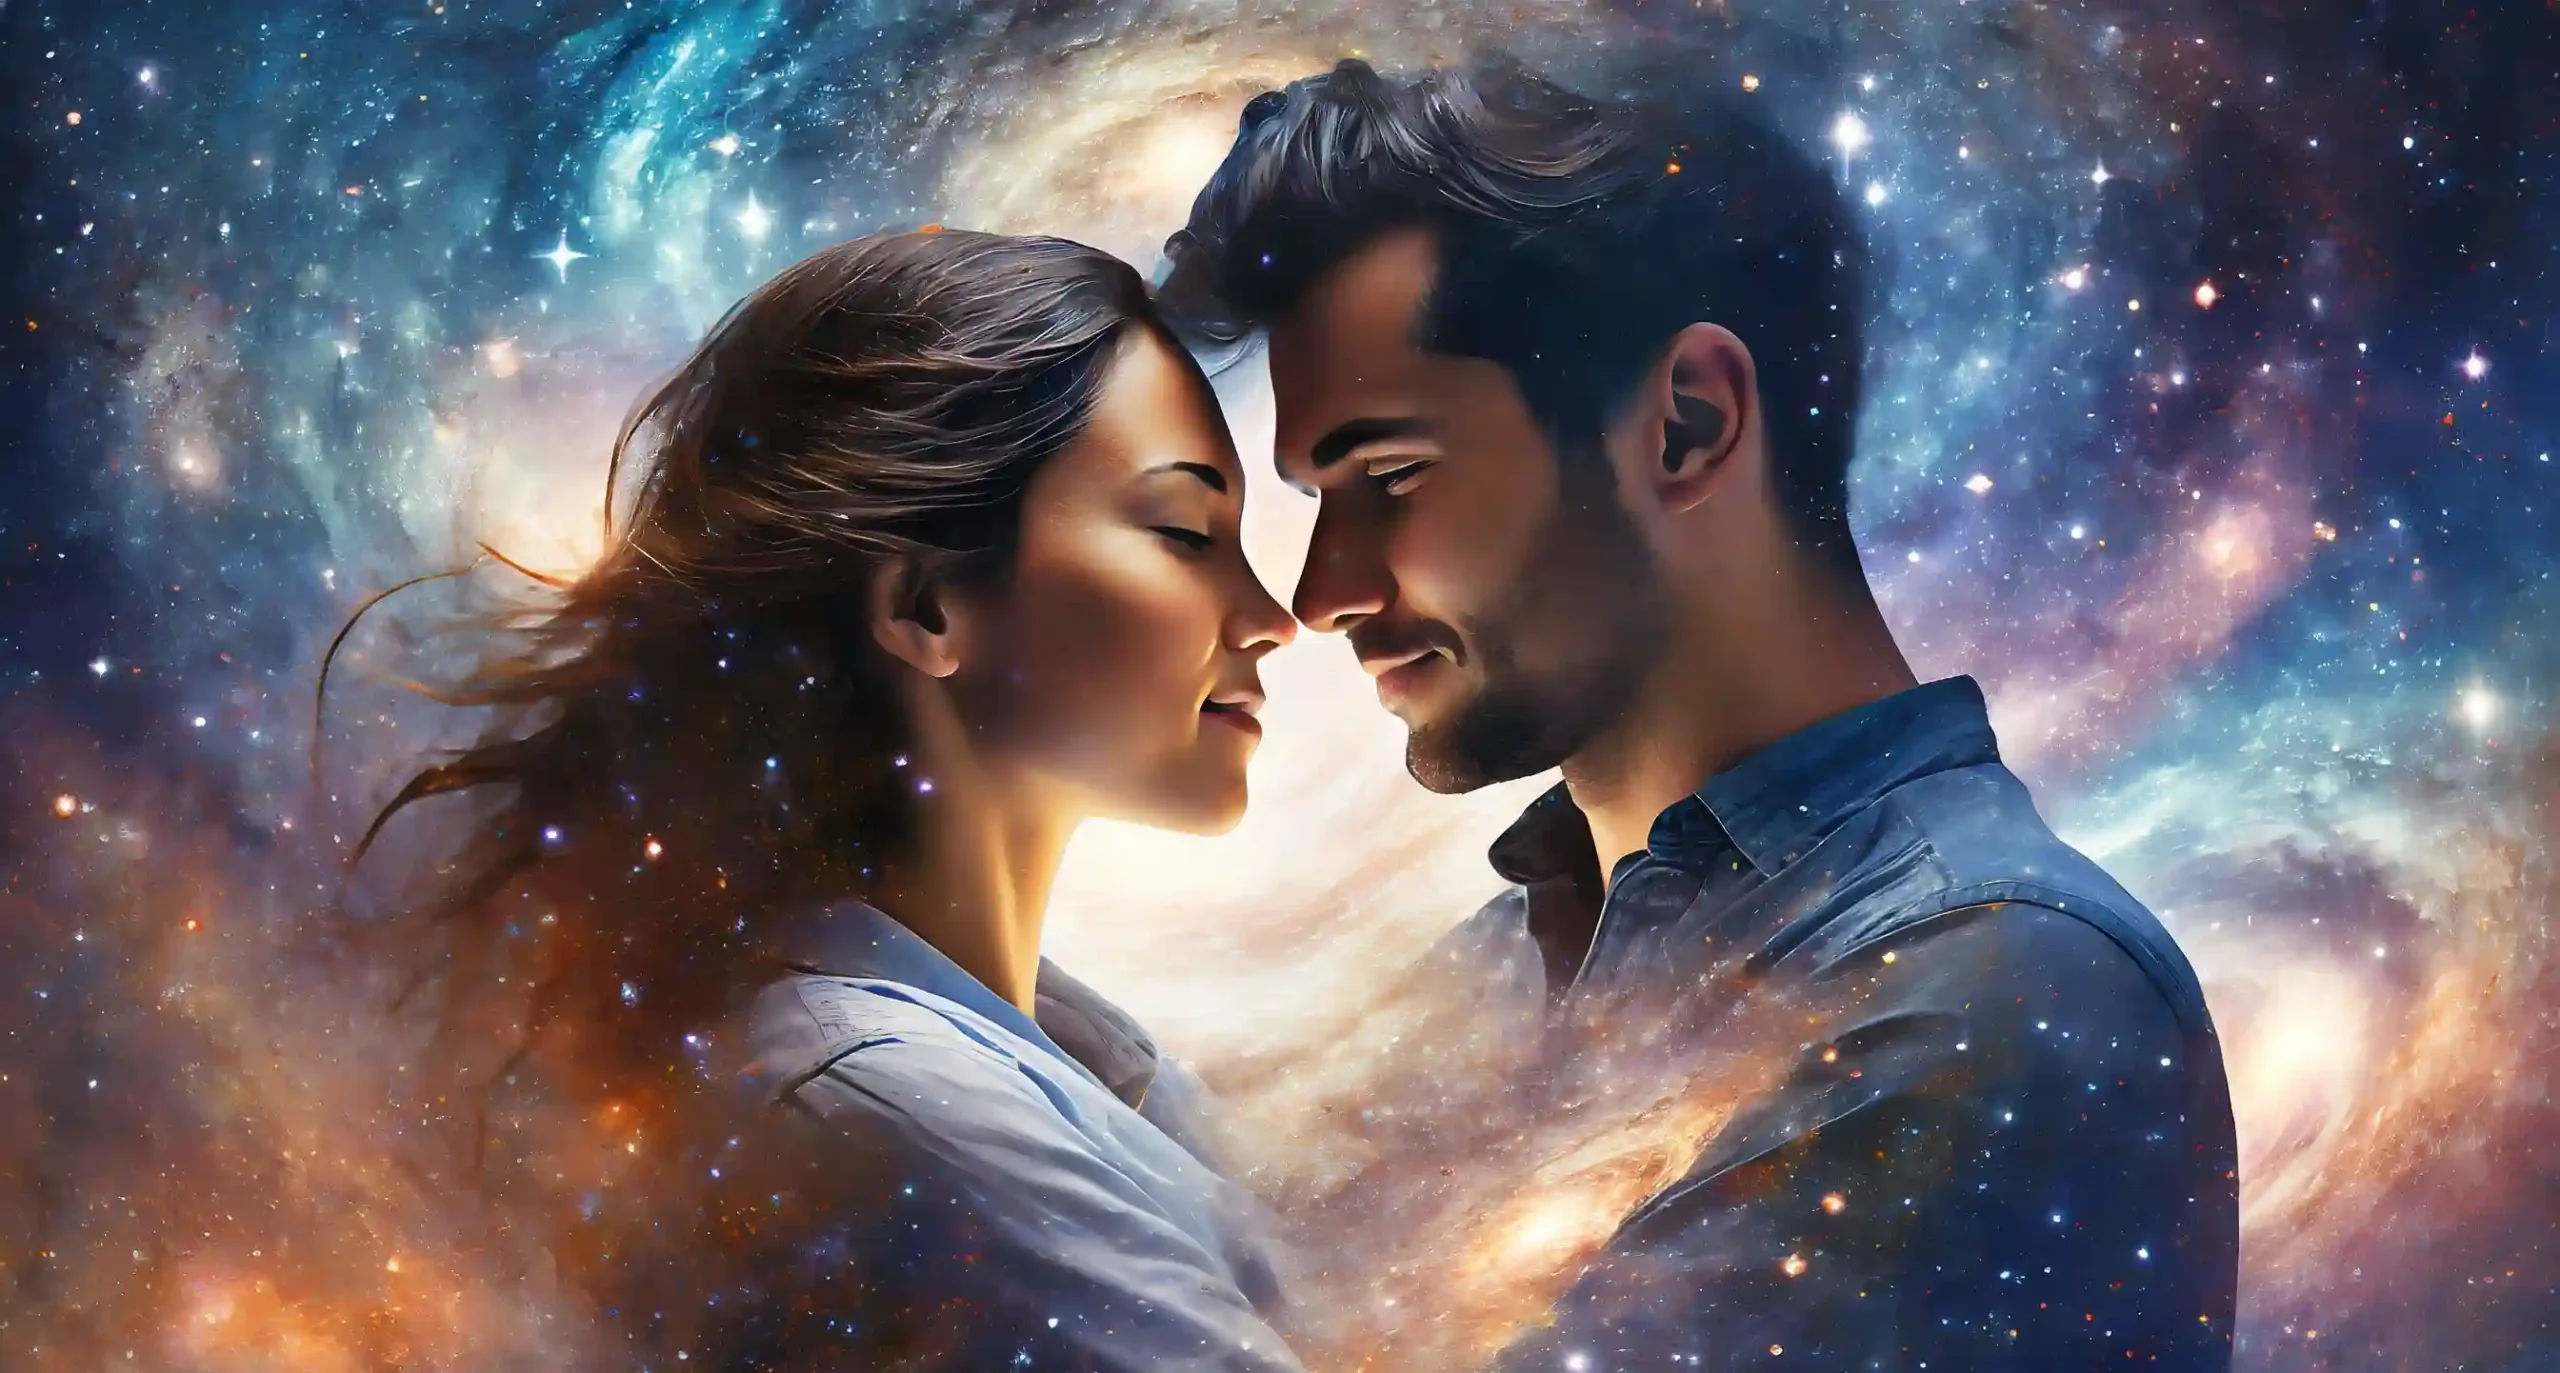 Cosmic Feeling Meaning in Relationship: Is Your Love Written in the Stars?